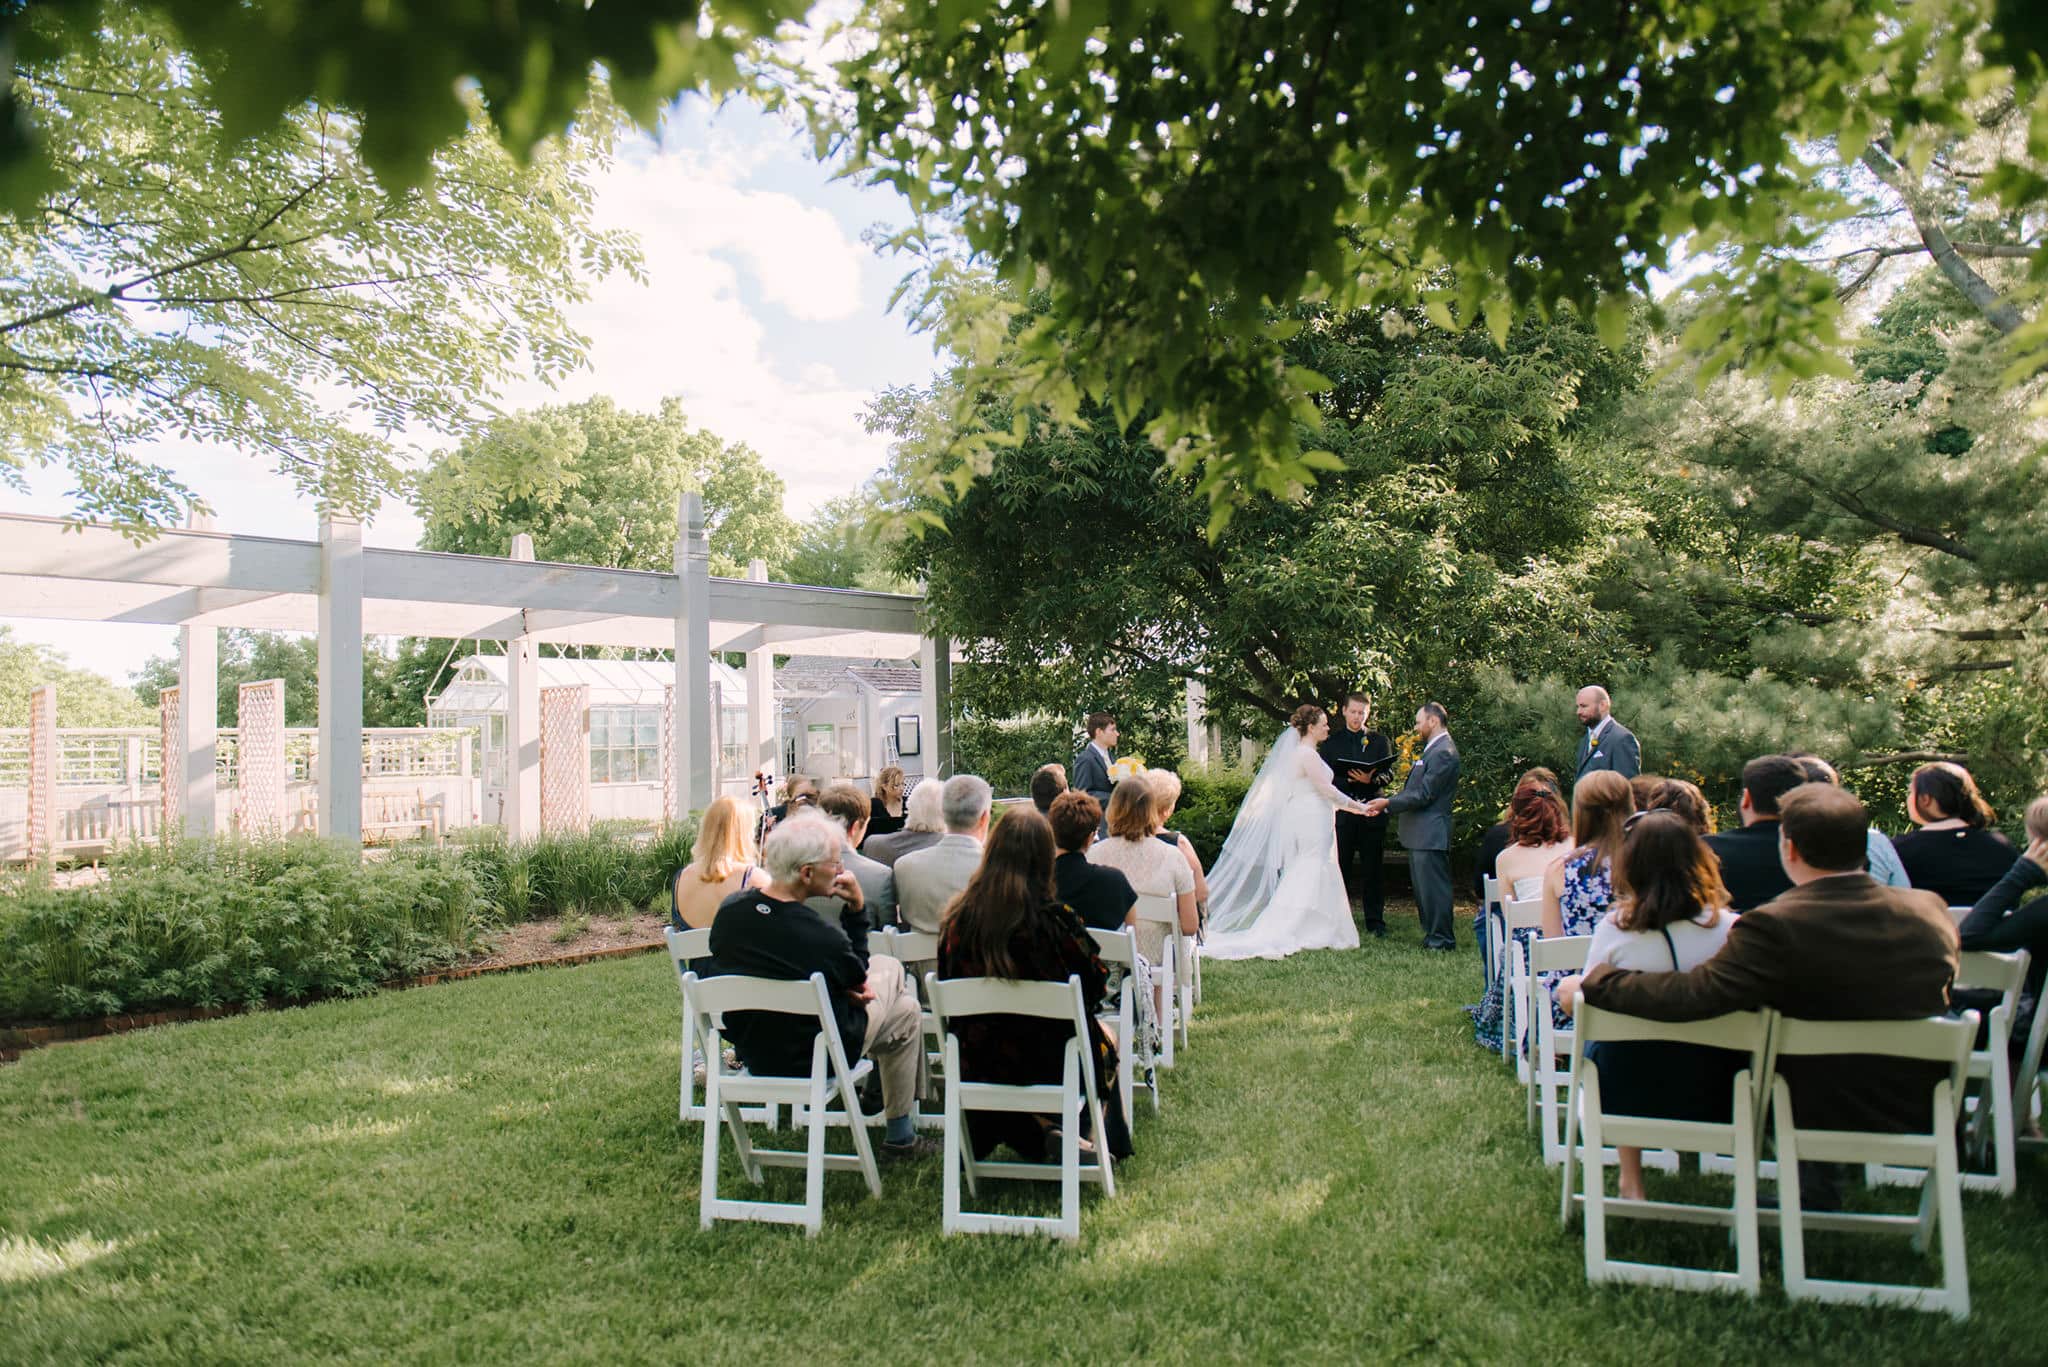 Wedding ceremony at the Minnesota Arboretum gardens with chairs outdoors